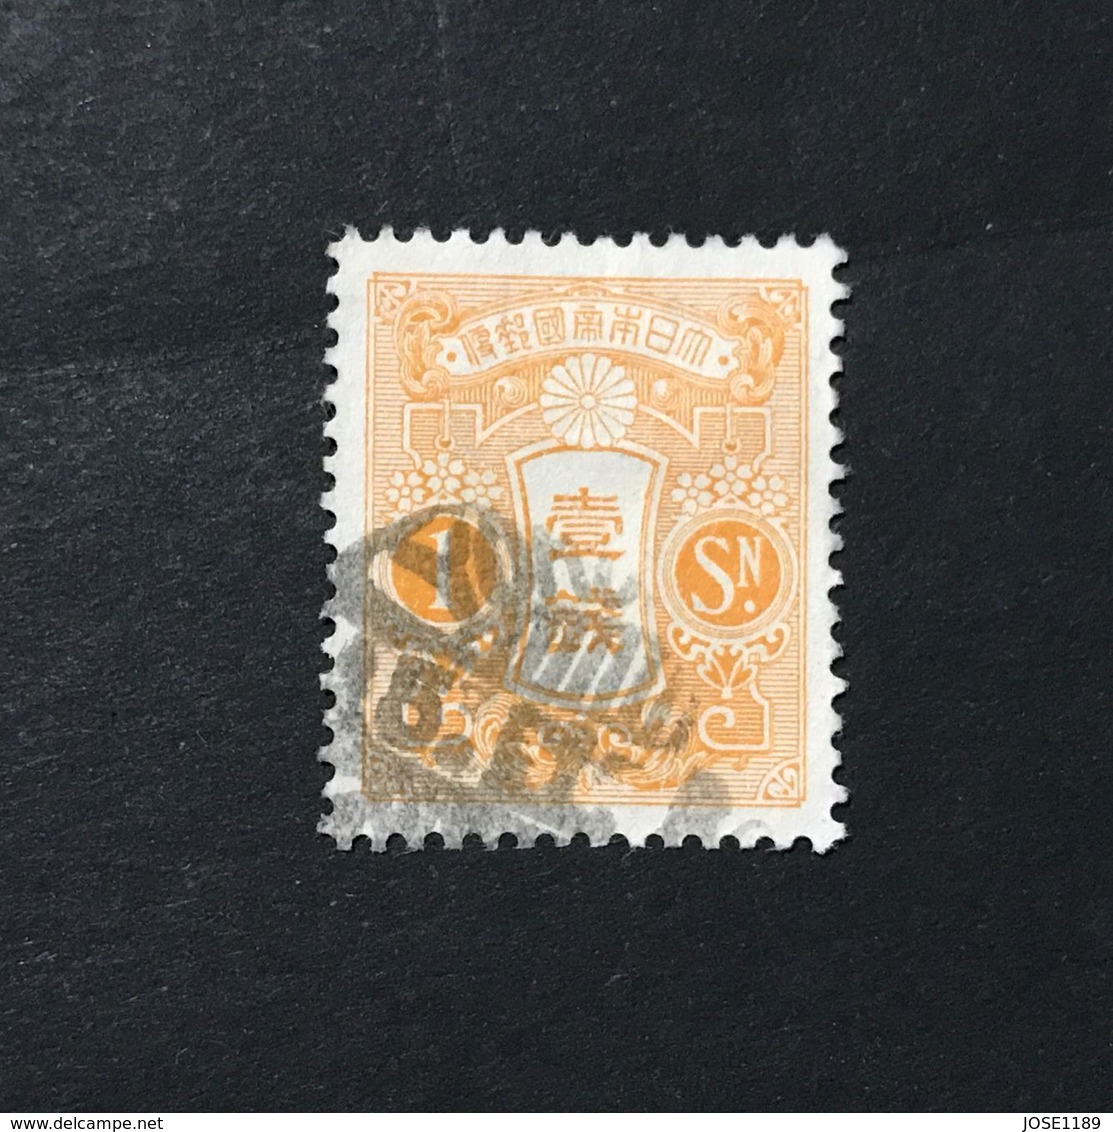 ◆◆◆ Japón 1937  Taisho Stamps “Showa” Wmkd. White Paper Flat Plate Print (New Die)  VI  1Sen  USED  18.5X22  AA582 - Used Stamps